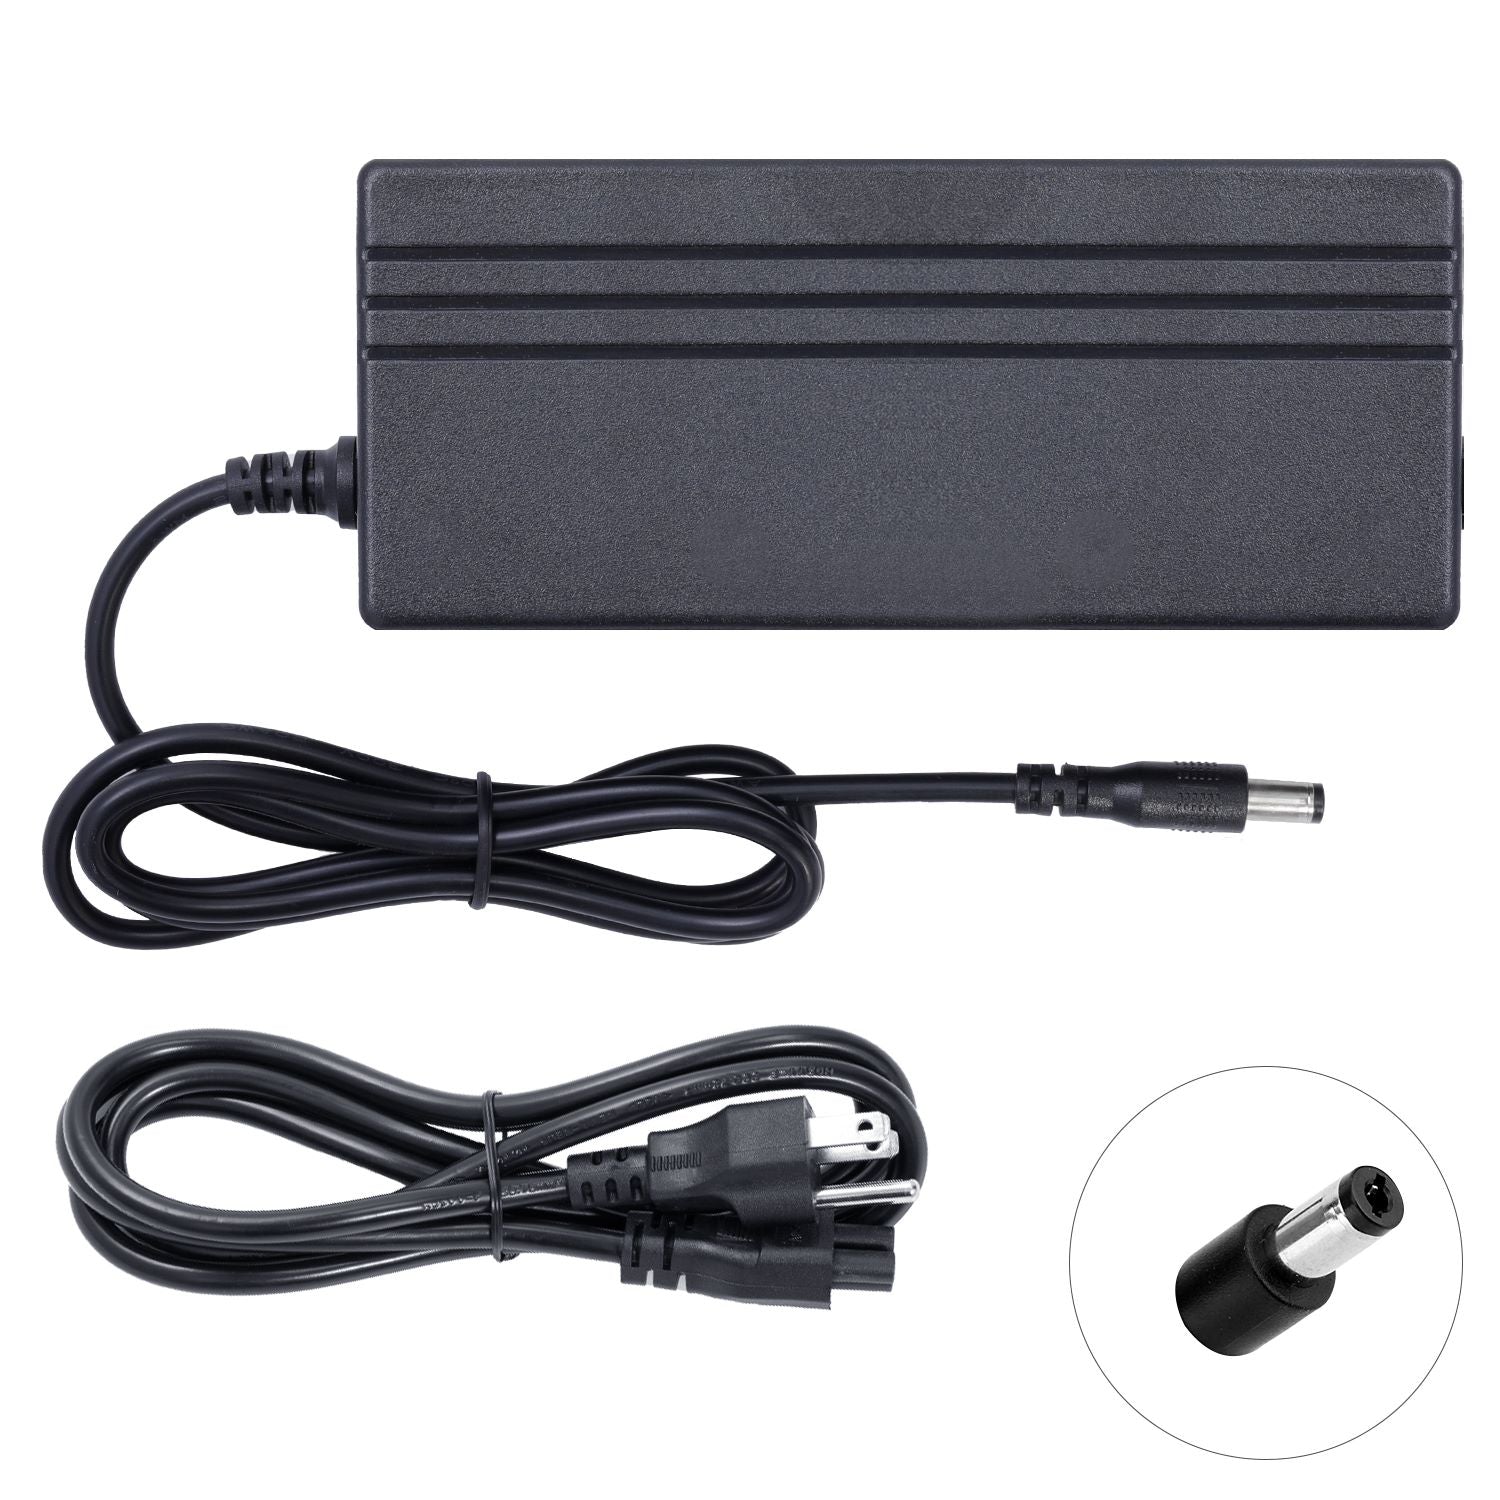 AC Adapter Power Supply for Sceptre C325W-1920R Monitor.